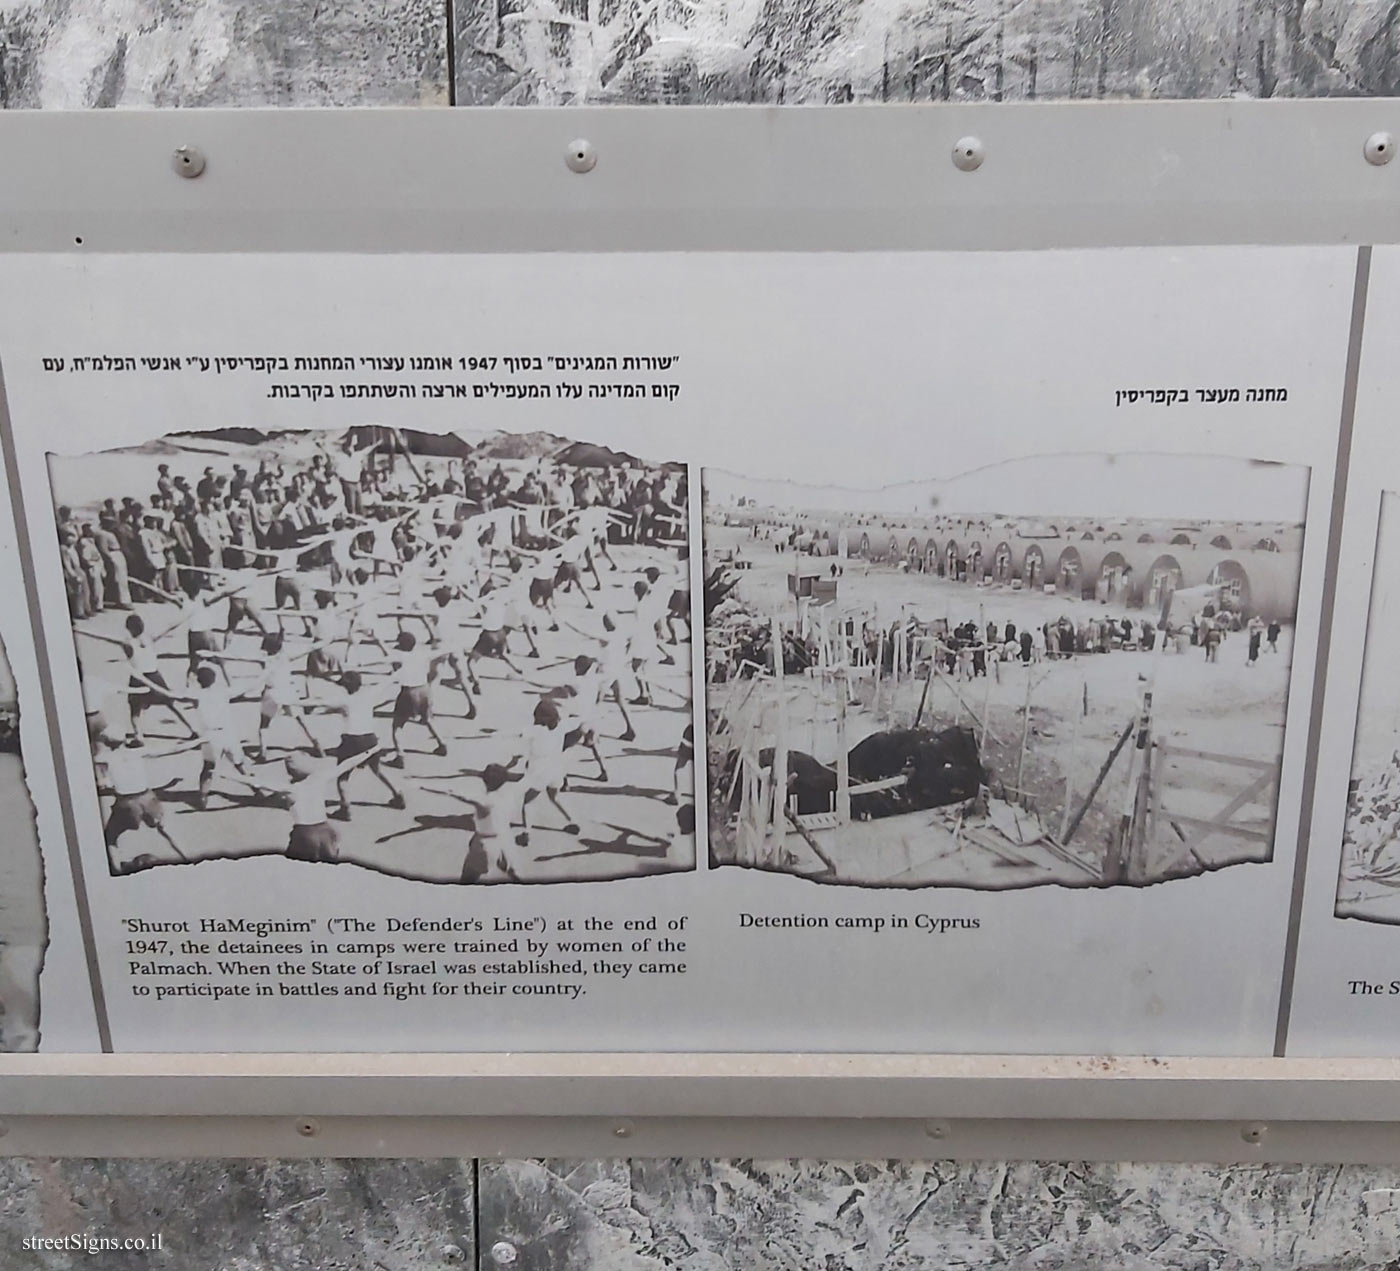 Tel Aviv - London Garden - The story of the illegal immigration - Detention camps in Cyprus